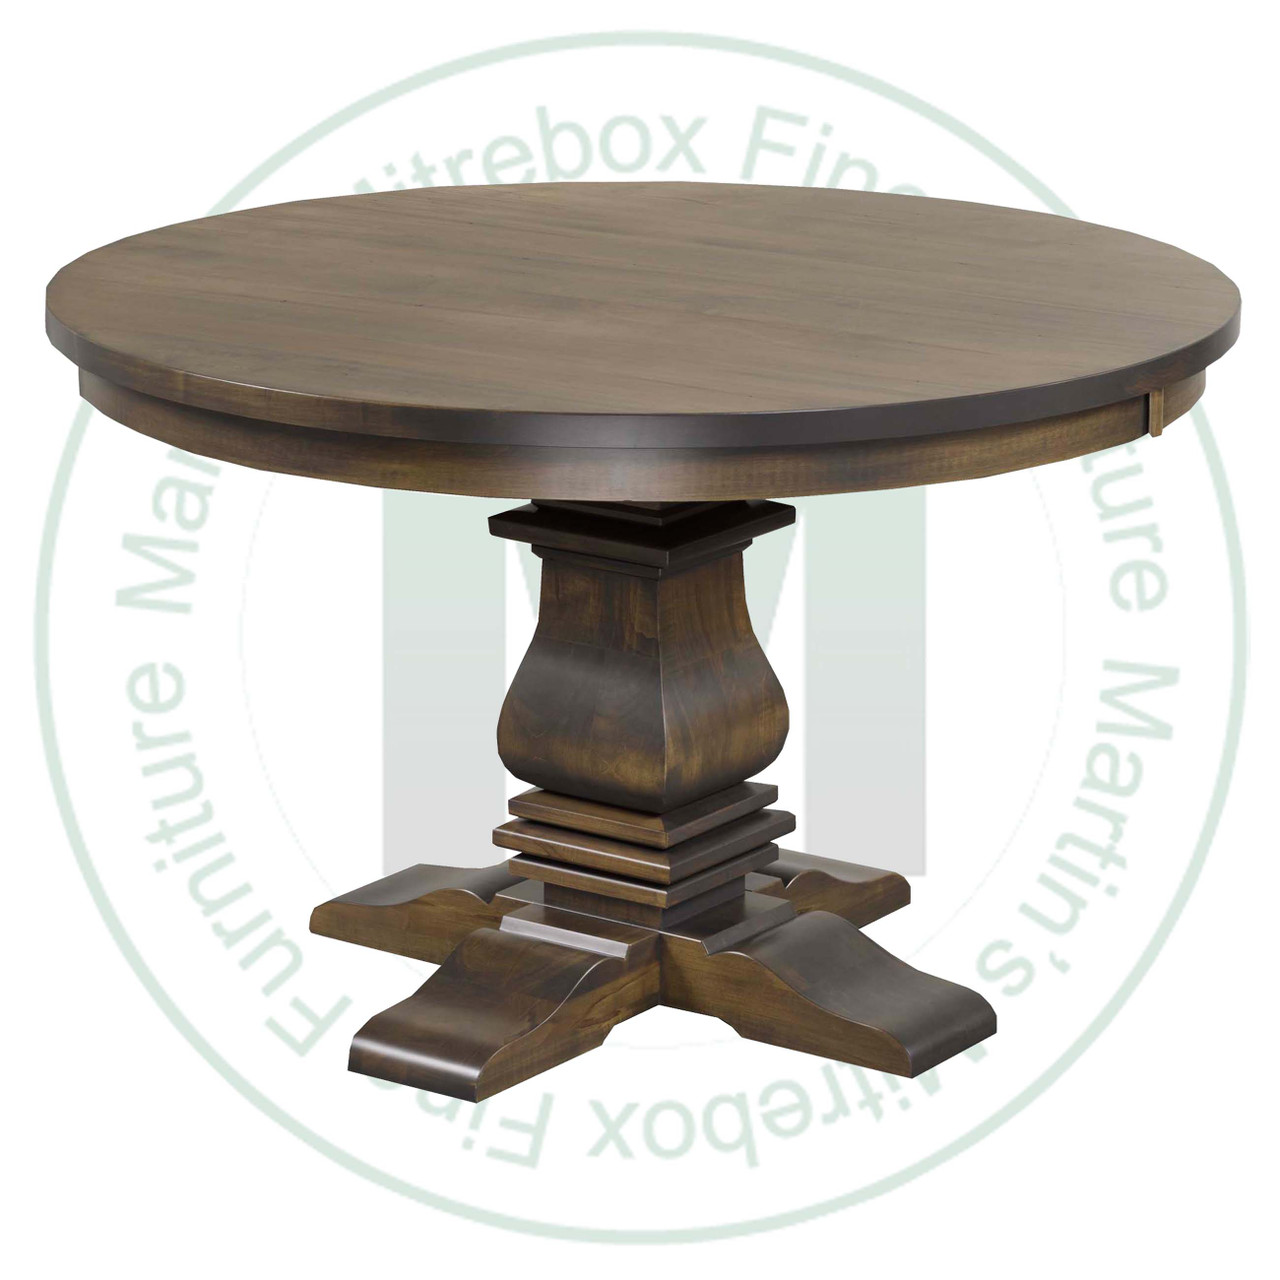 Oak Spartan Collection Single Pedestal Table 36''D x 48''W x 30''H With 1 - 12'' Leaf. Table Has 1.25'' Thick Top